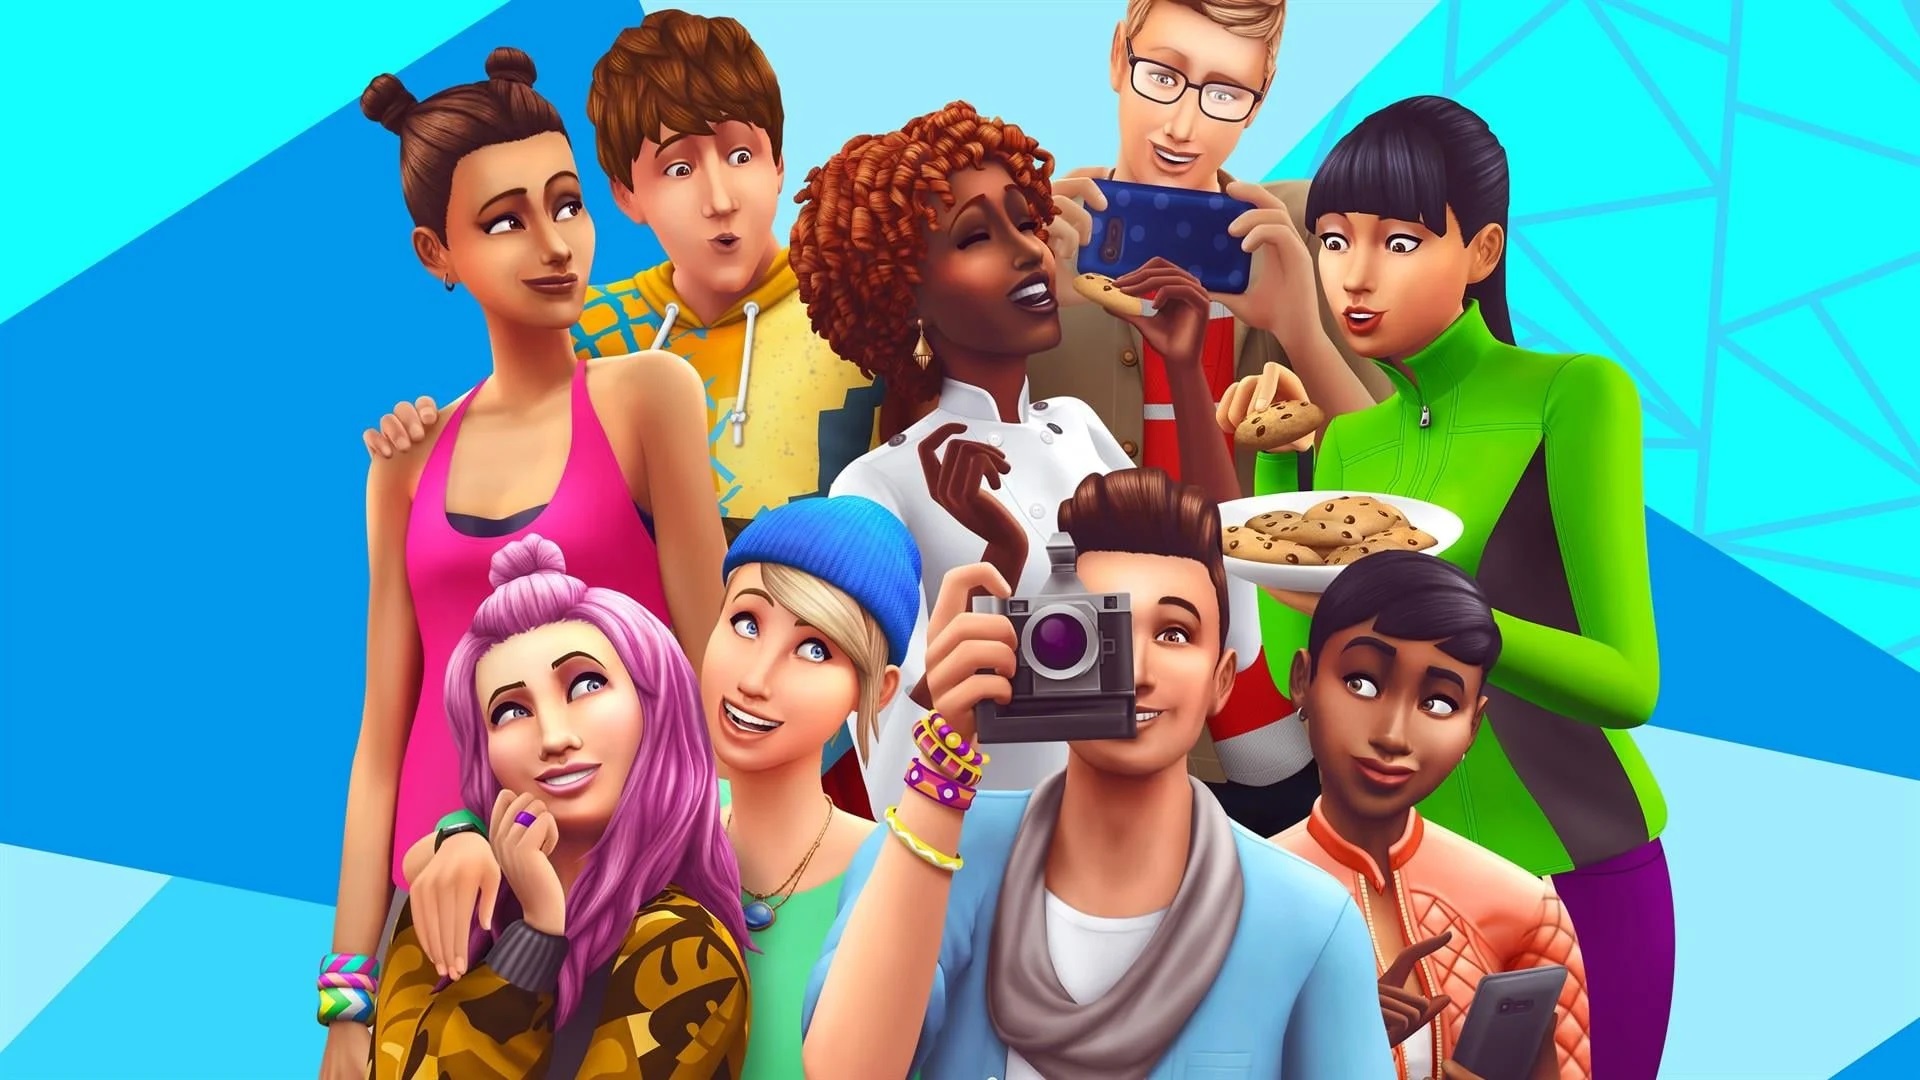 play sims 4 without origin key